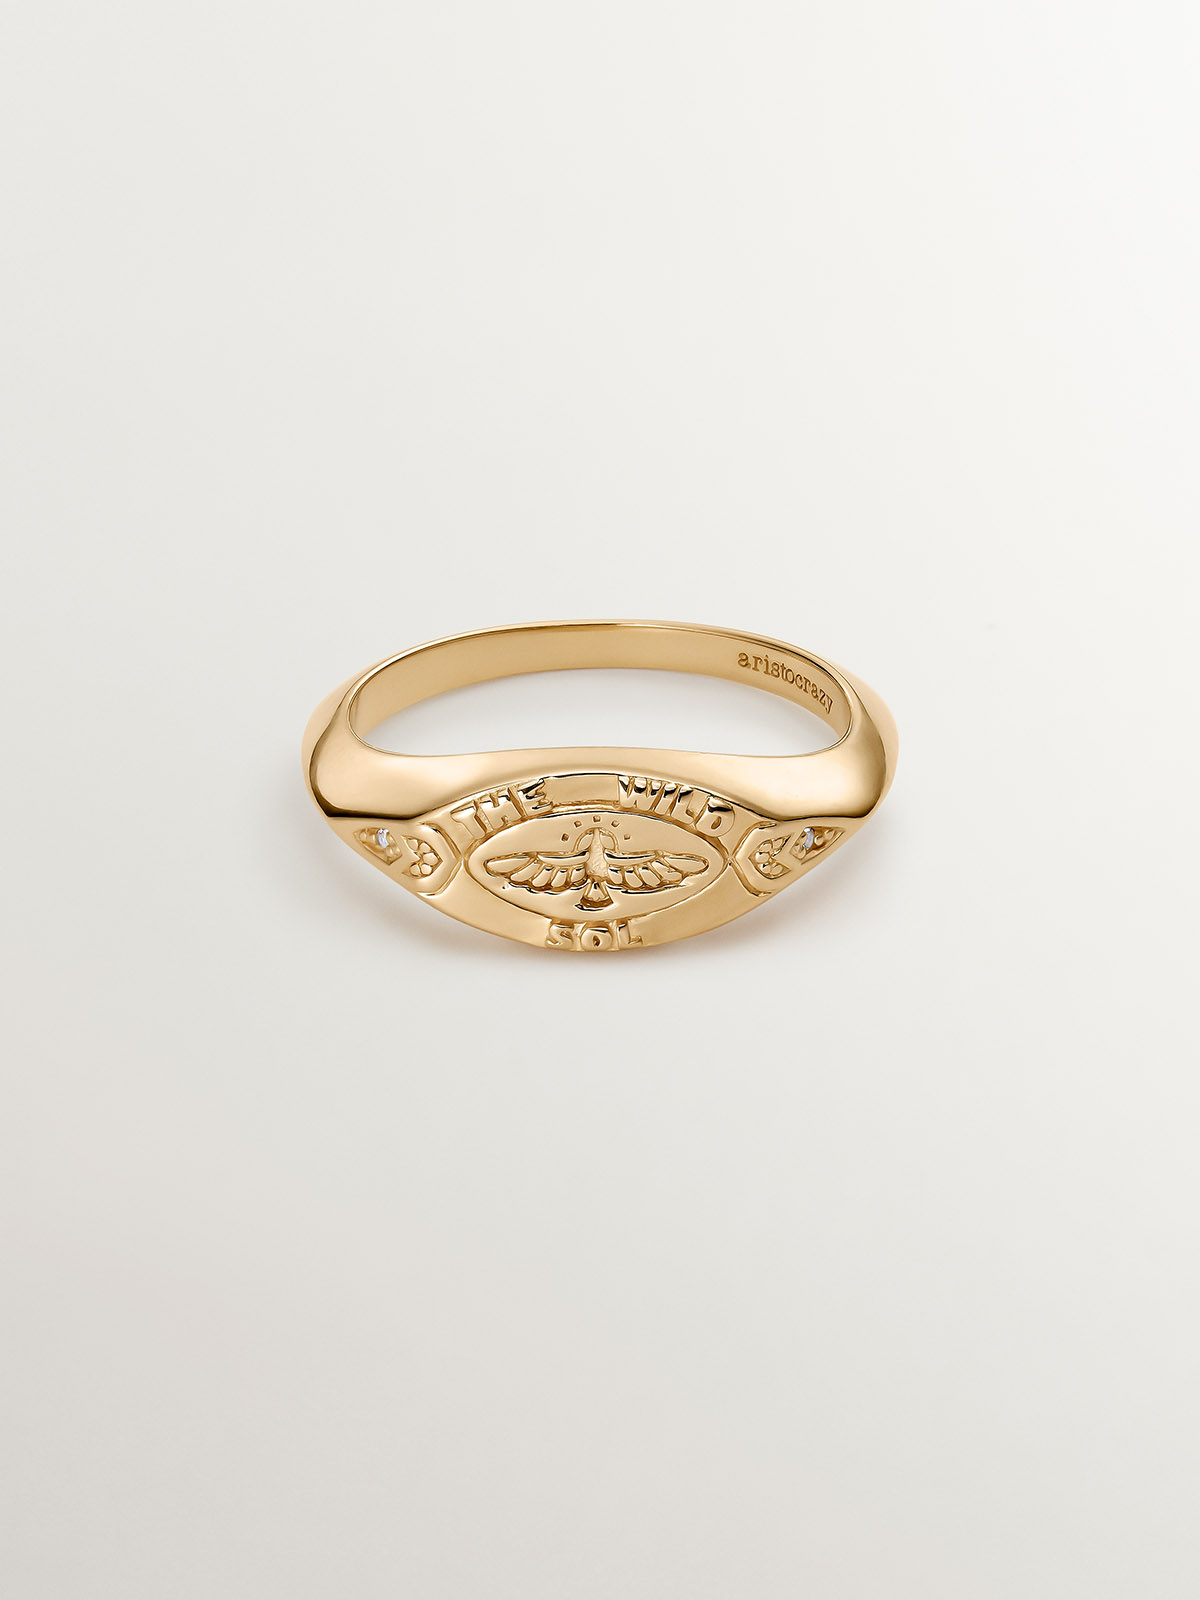 925 Silver seal ring bathed in 18K yellow gold with white topaz and eagle.